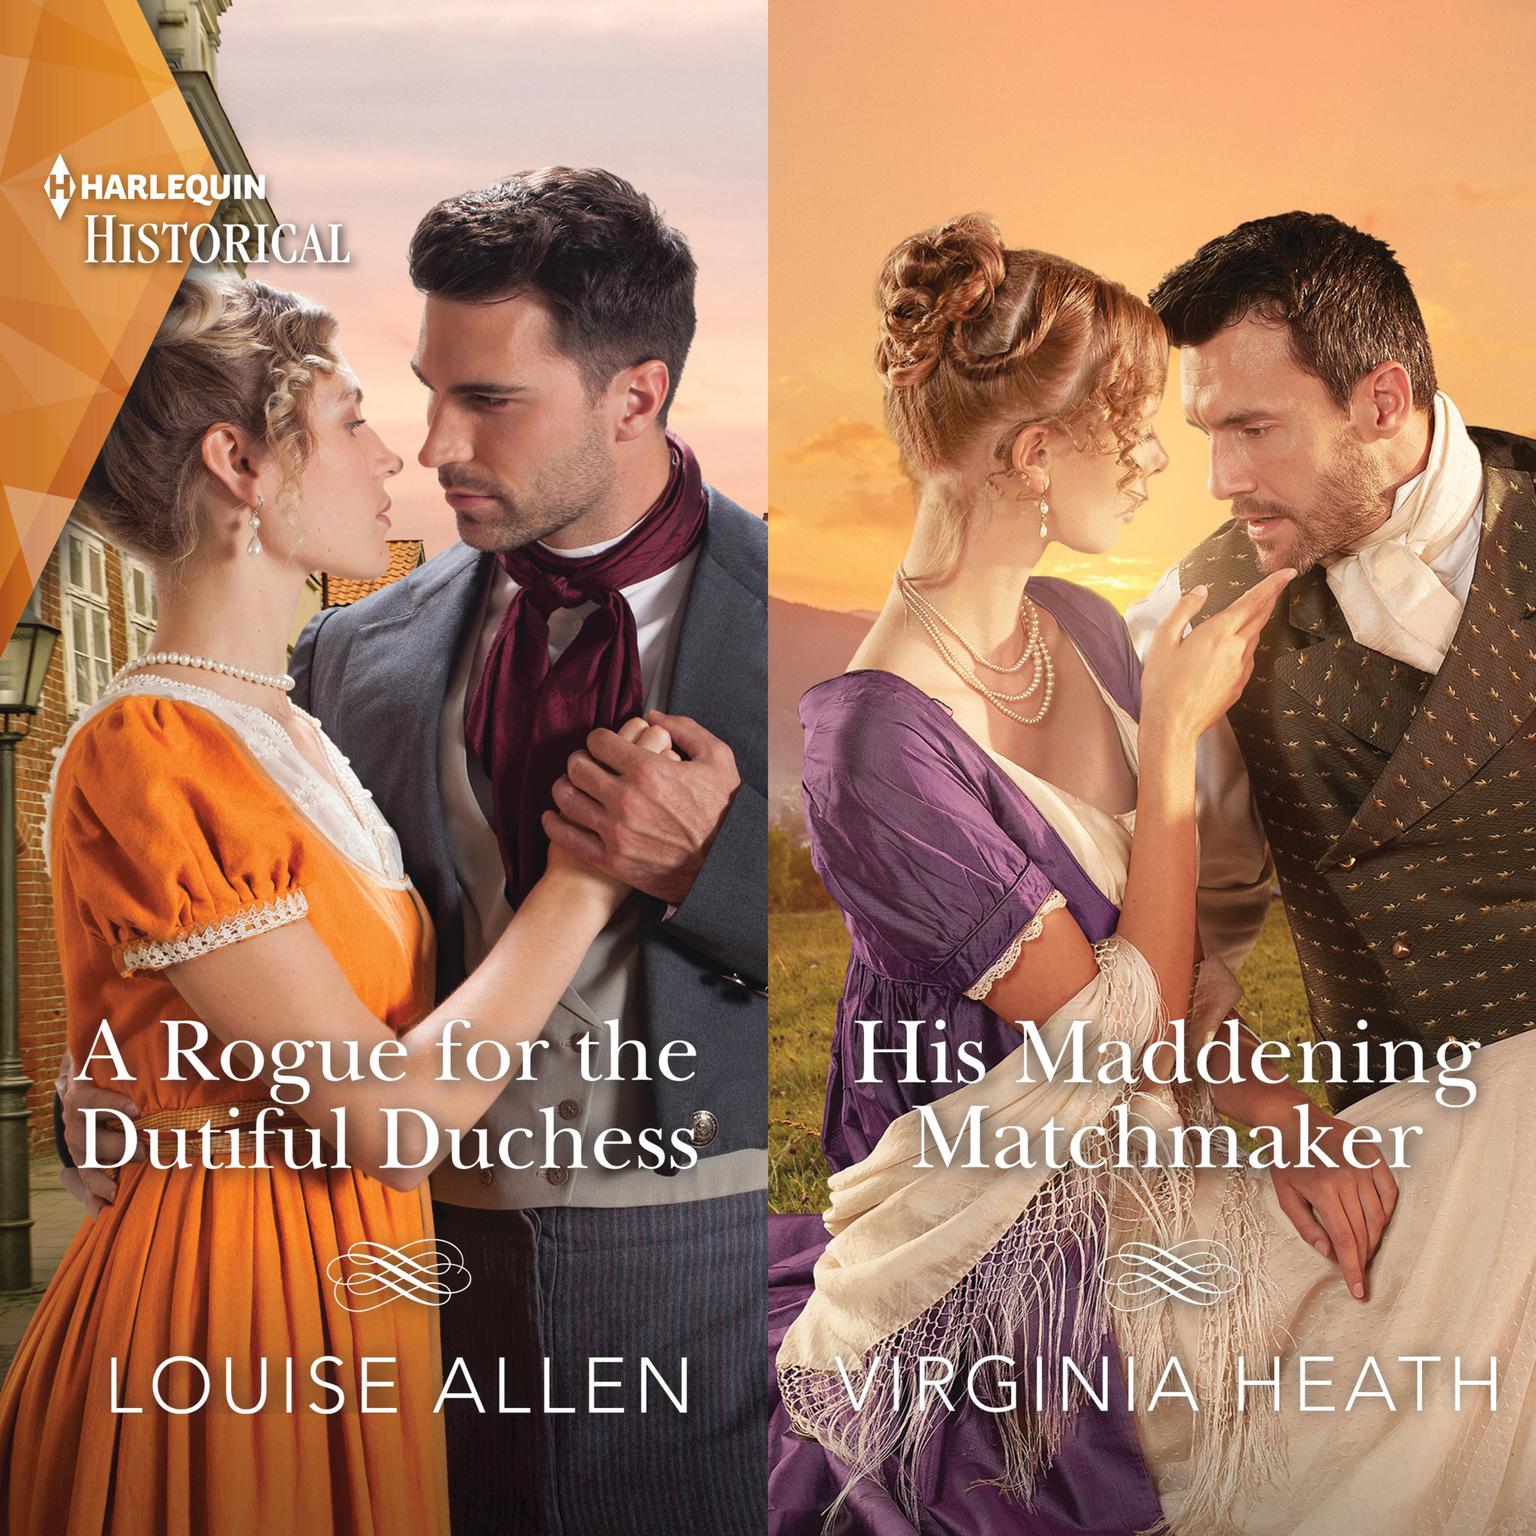 A Rogue for the Dutiful Duchess & His Maddening Matchmaker Audiobook, by Louise Allen